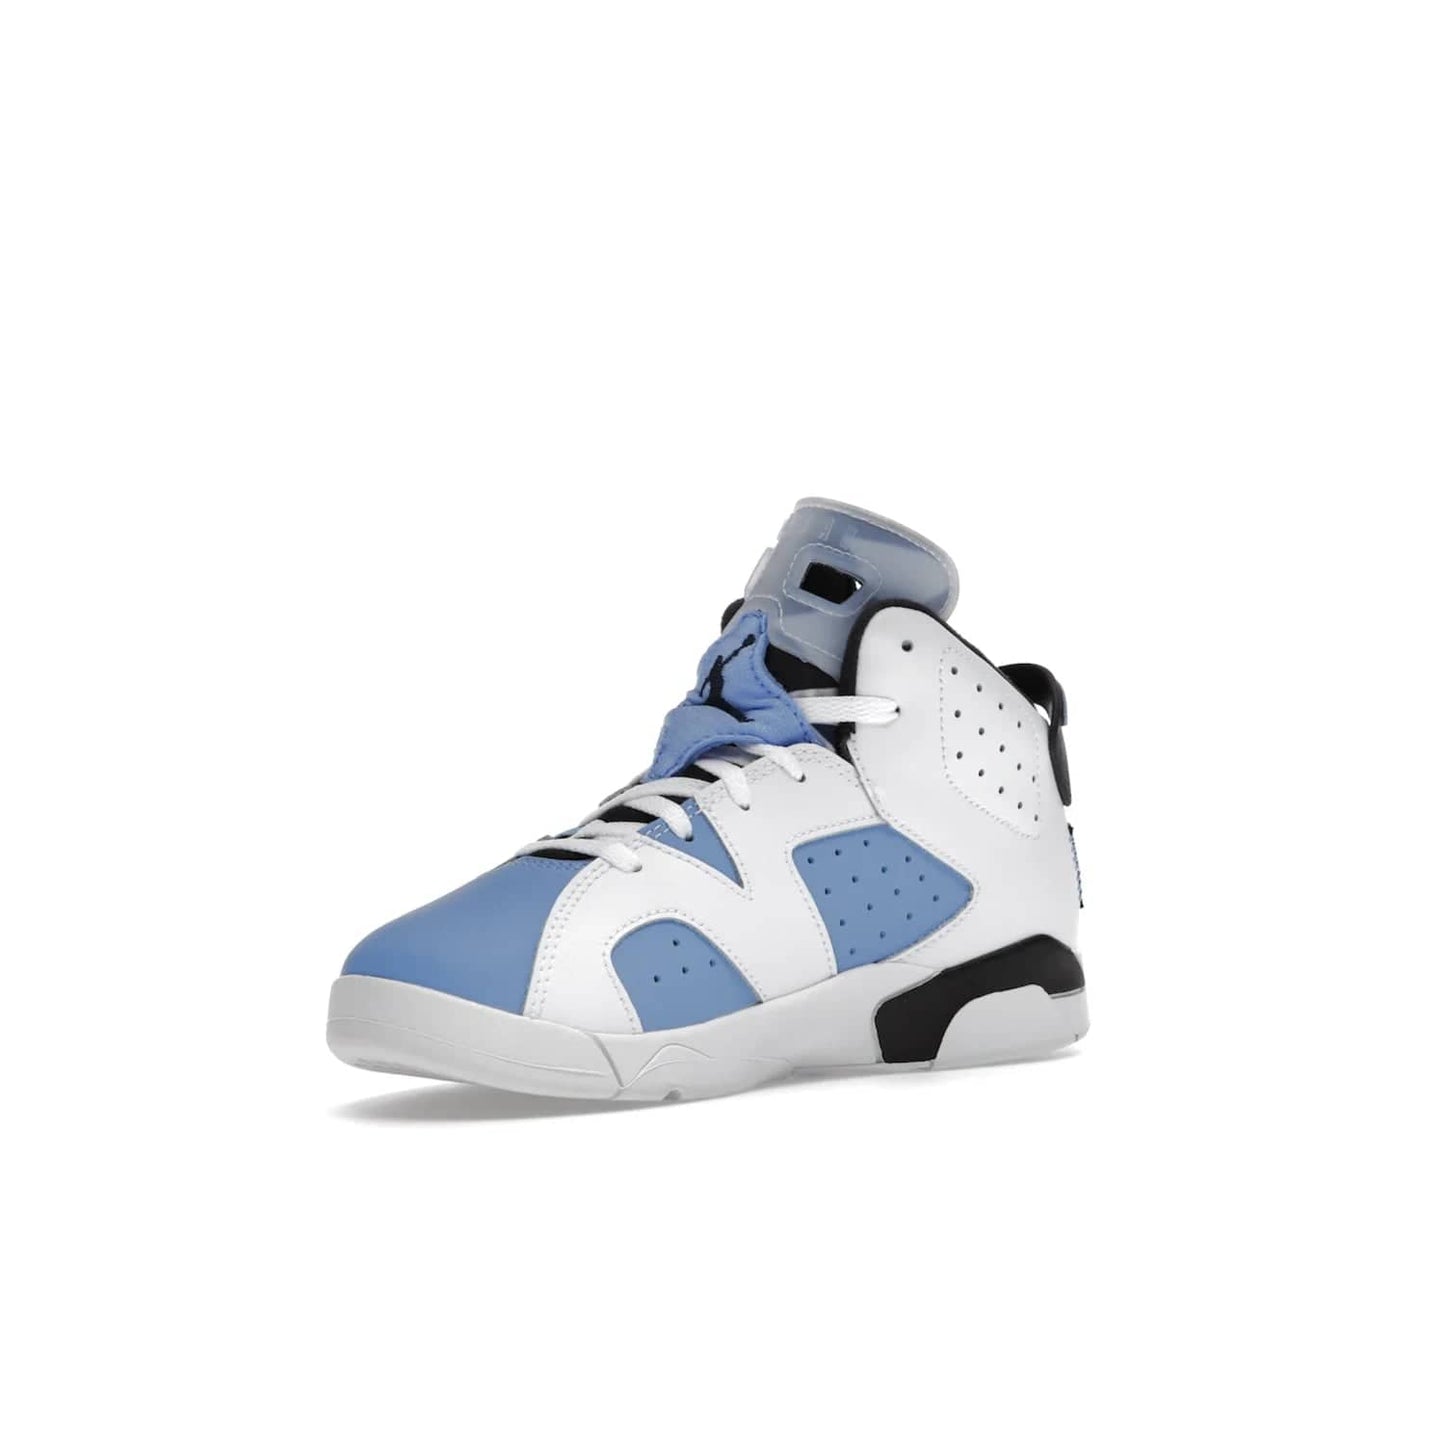 Jordan 6 Retro UNC White (PS) - Image 15 - Only at www.BallersClubKickz.com - The Air Jordan 6 Retro UNC White PS celebrates Michael Jordan's alma mater, the University of North Carolina. It features a classic color-blocking of the iconic Jordan 6 Carmine and a stitched Jordan Team patch. This must-have sneaker released on April 27th, 2022. Referencing the university colors, get this shoe for a stylish and timeless style with university pride.